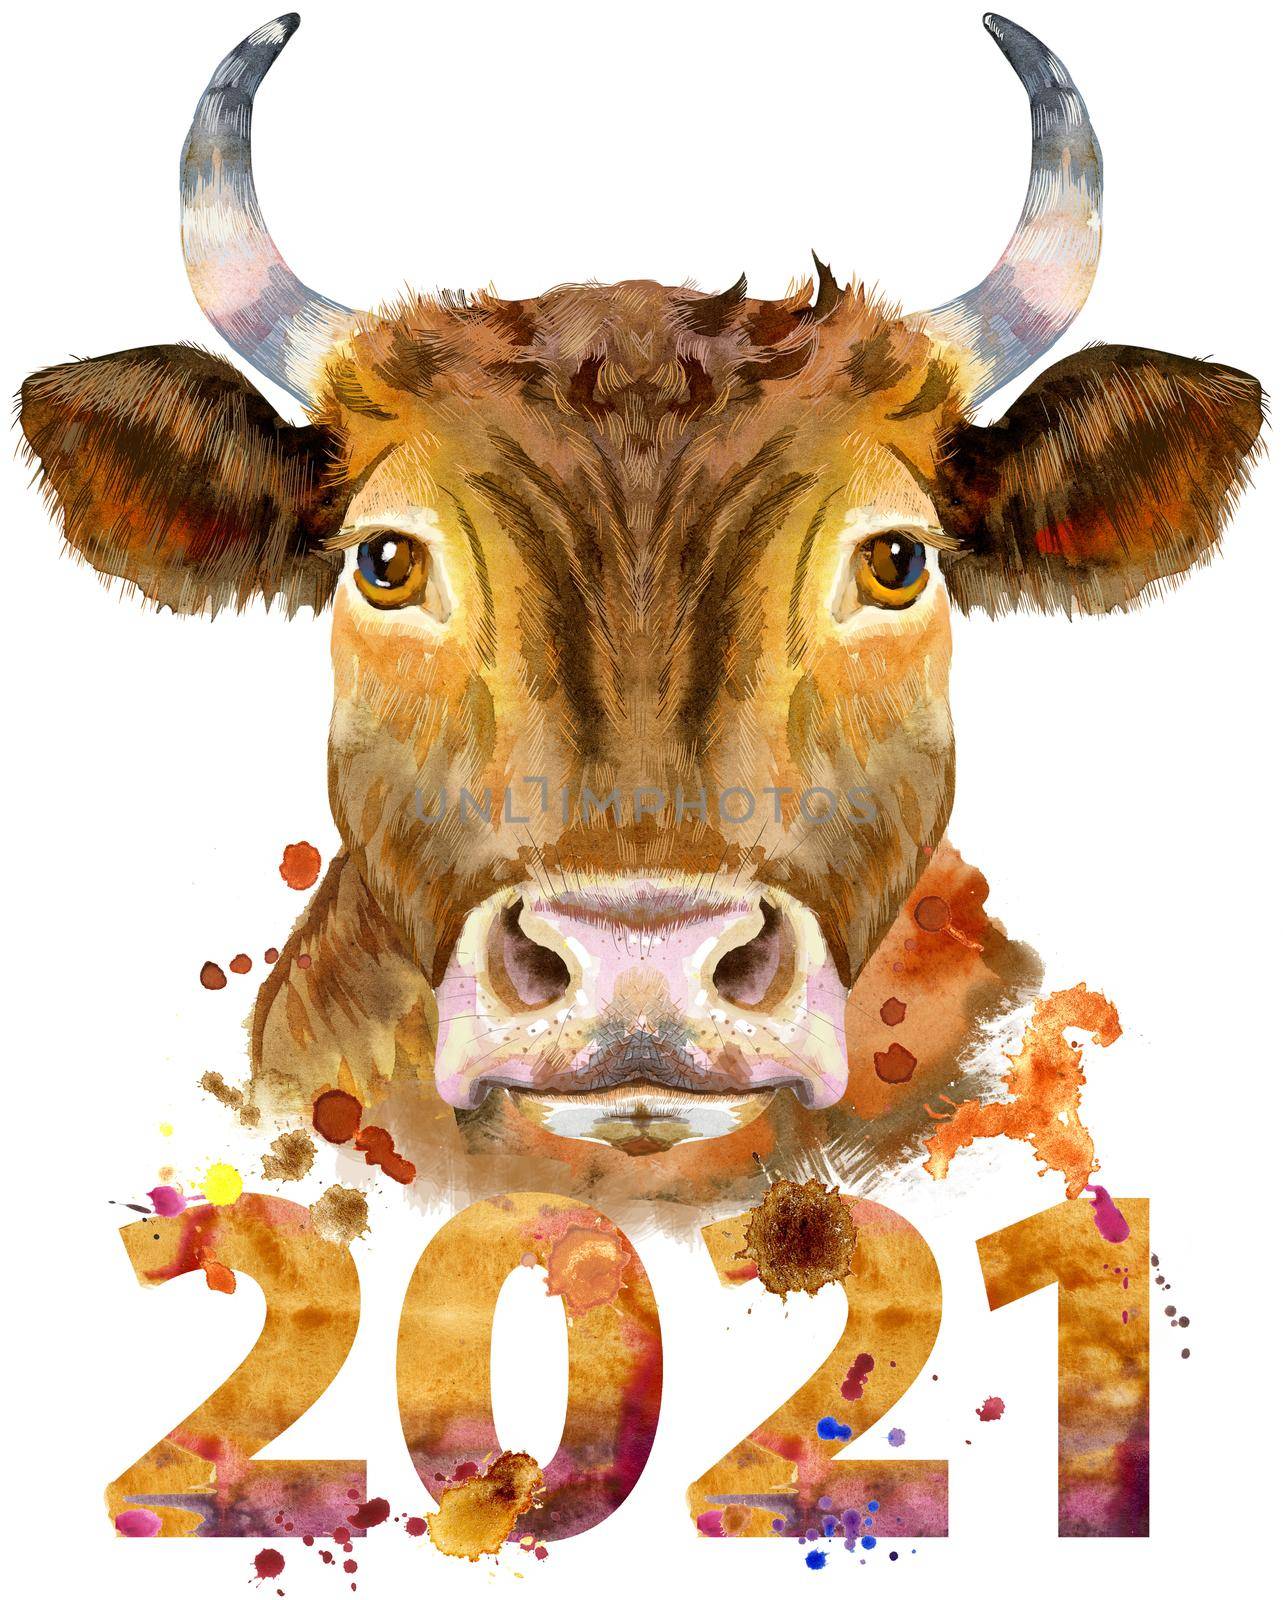 Bull with number 2021 watercolor graphics. Bull animal illustration with splash watercolor textured background.